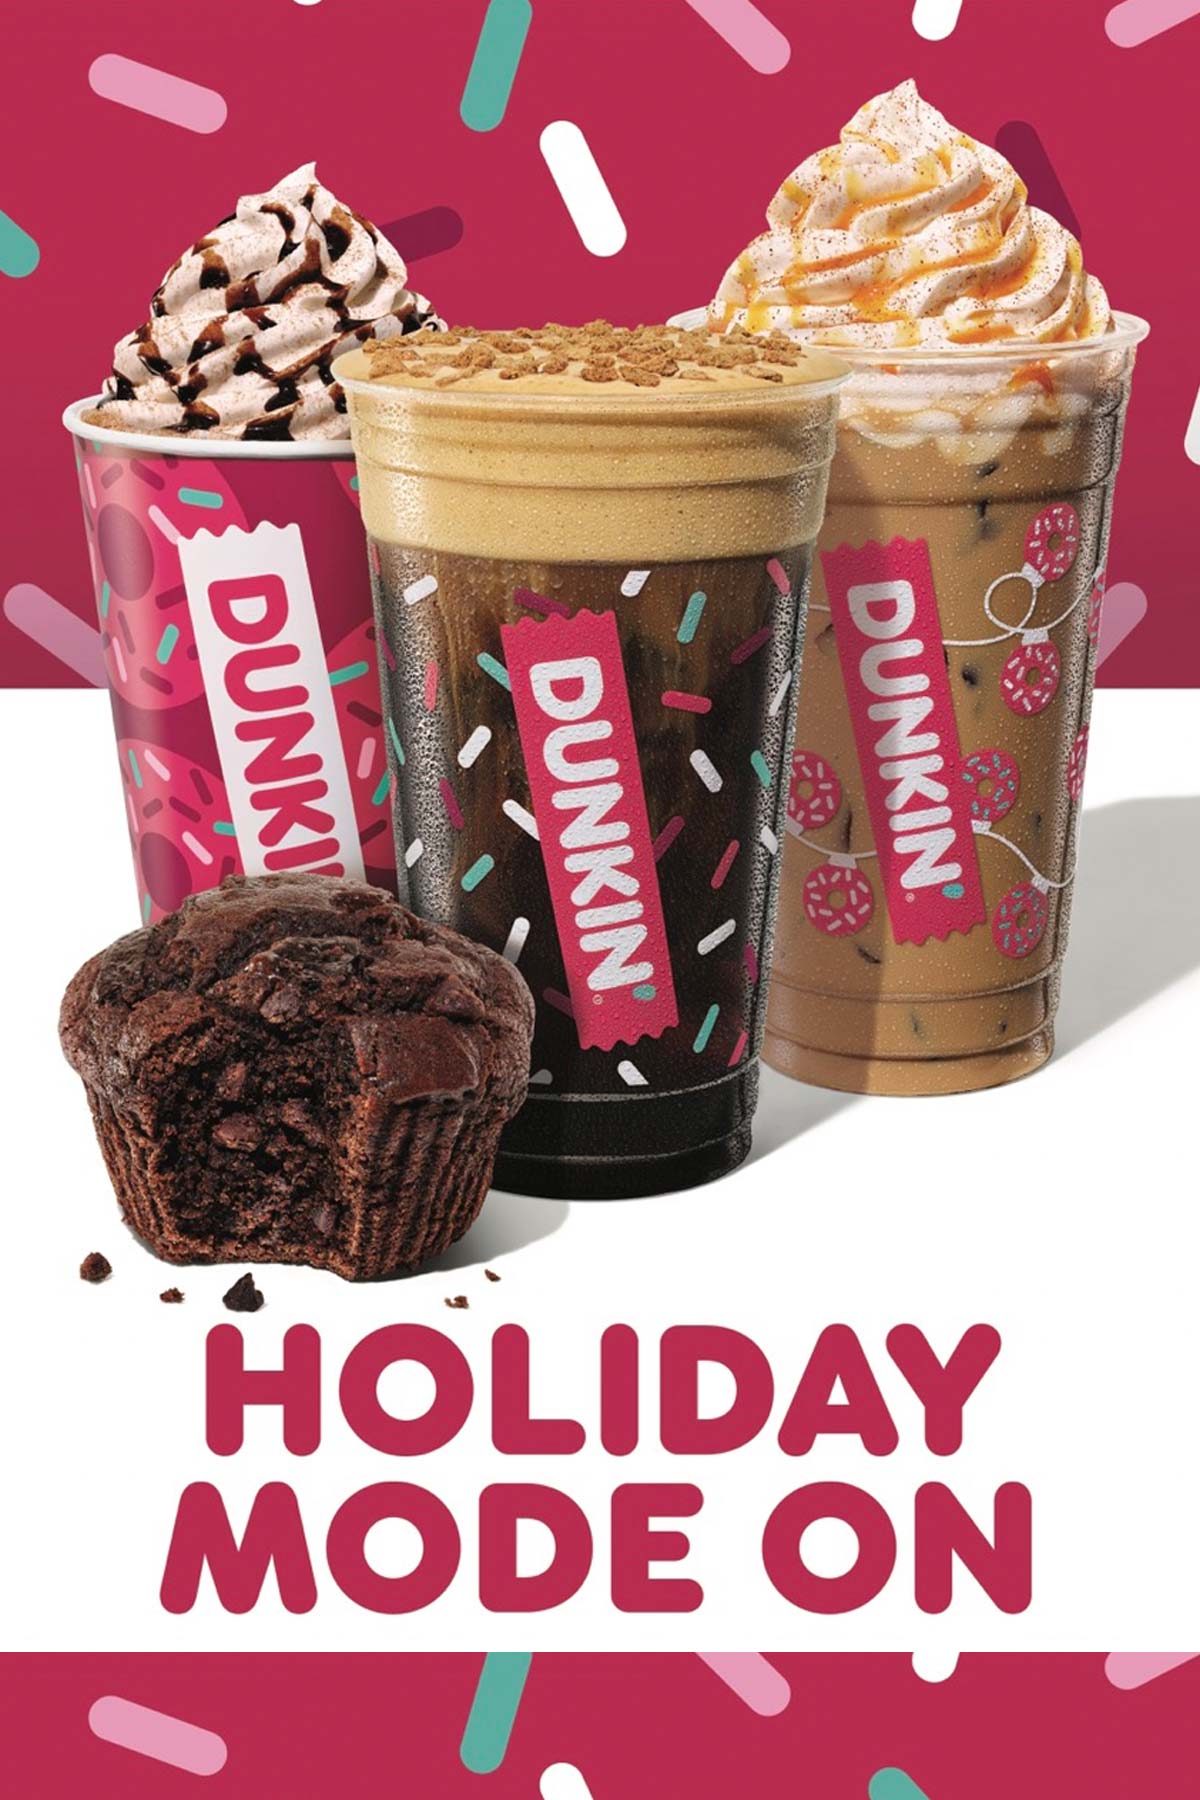 3 Dunkin' holiday drinks and a triple chocolate muffin.